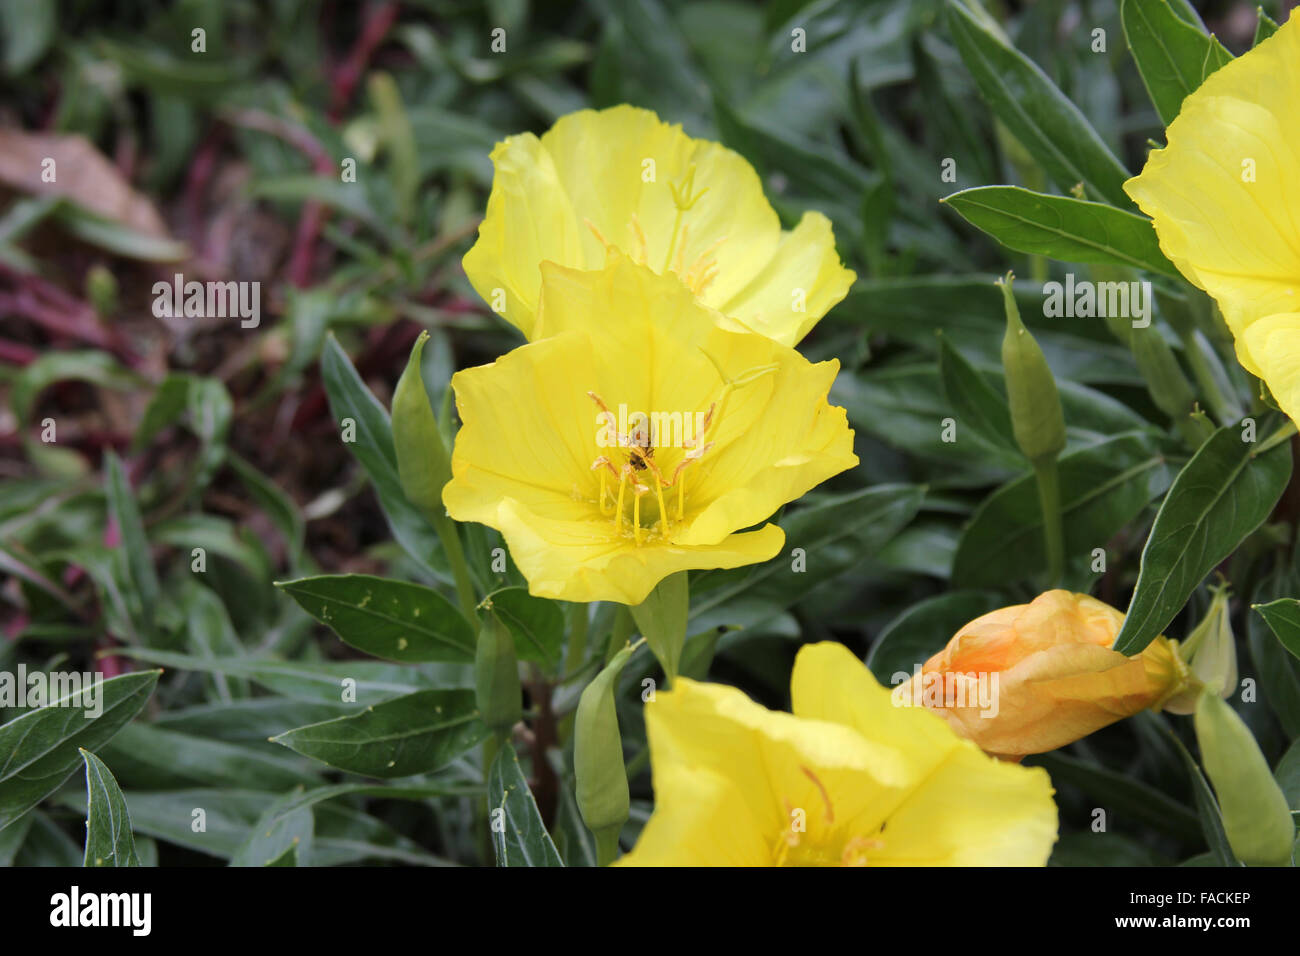 Ventral view of marmalade hoverfly (Episyrphus balteatus) on an evening primrose (Oenothera) Stock Photo